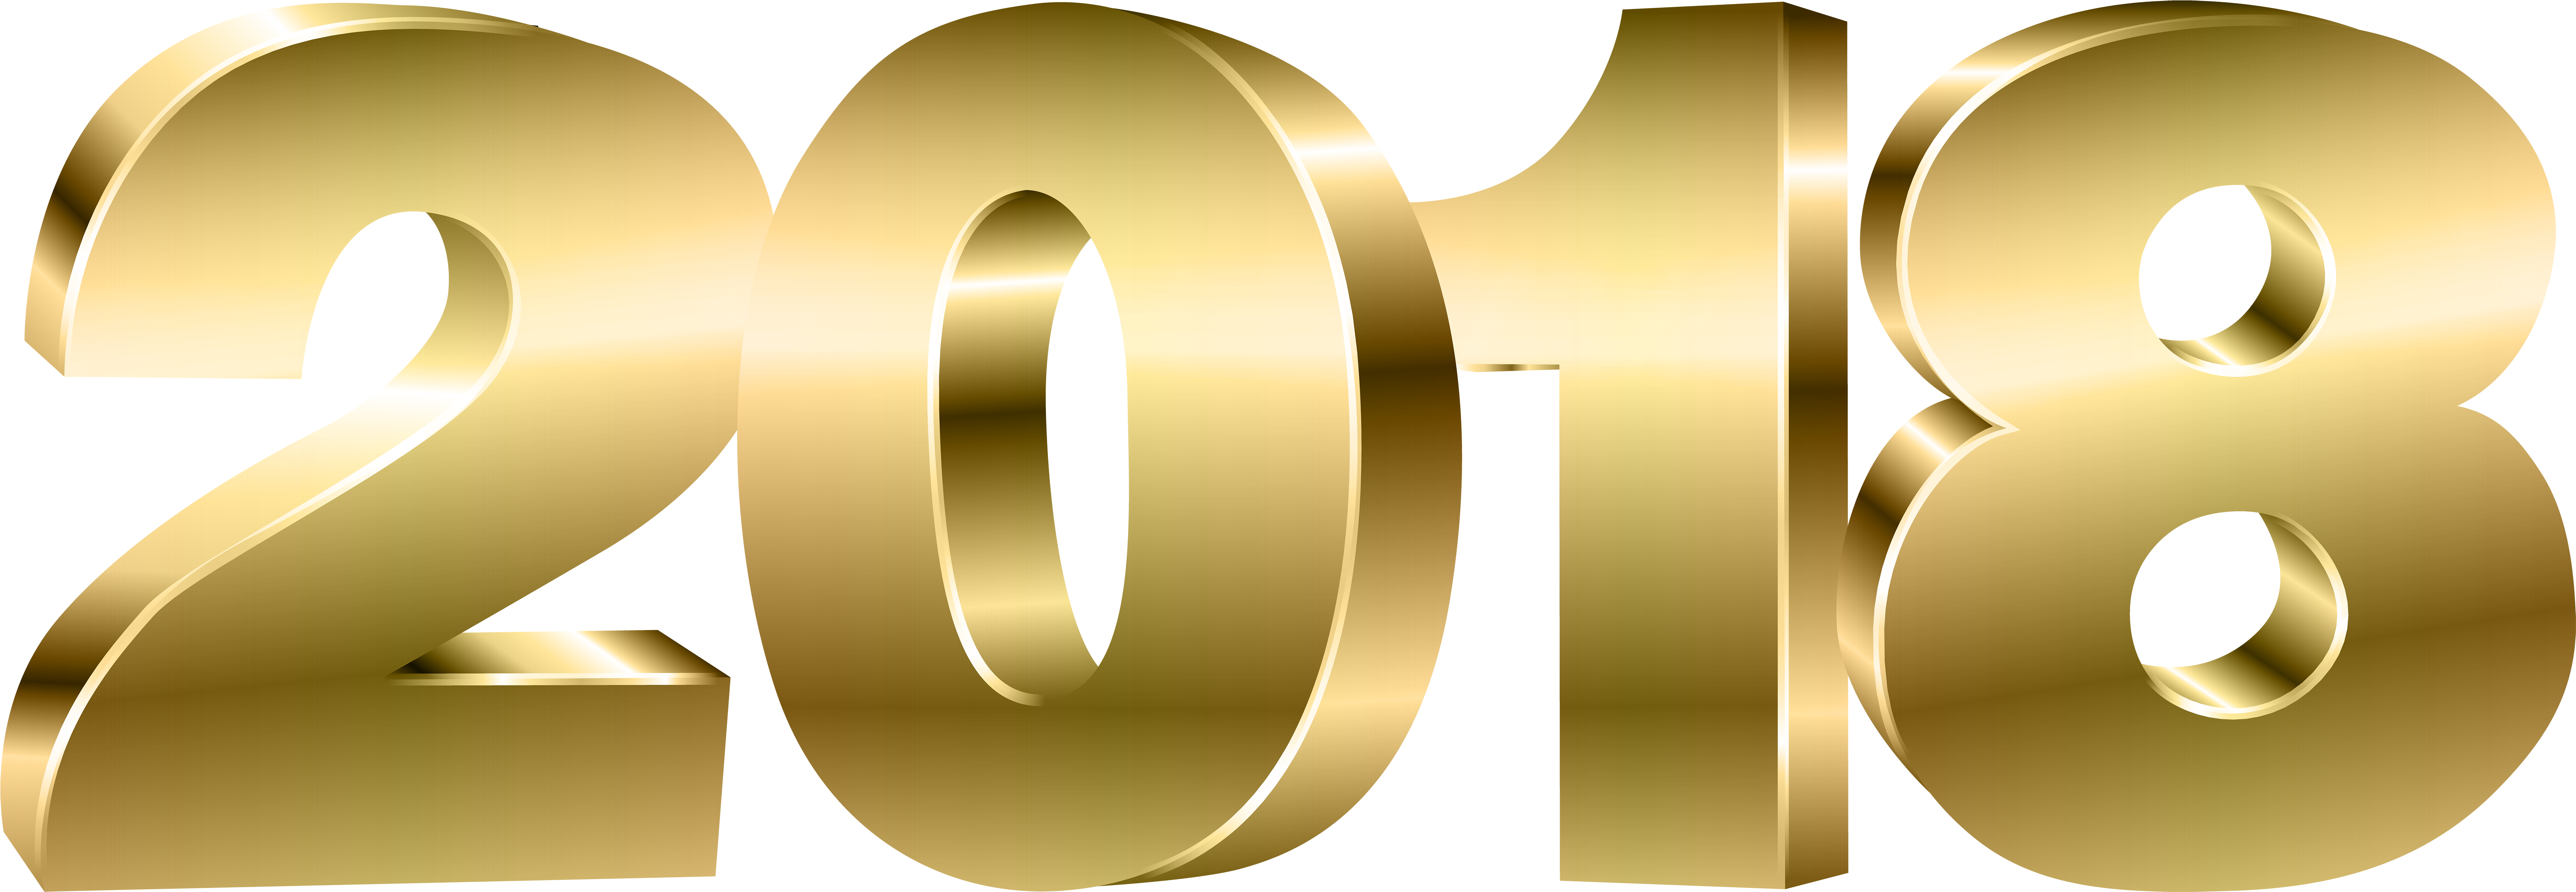 2018 Gold Png Clipart Image - 2018 With Transparent Background (8000x2825)